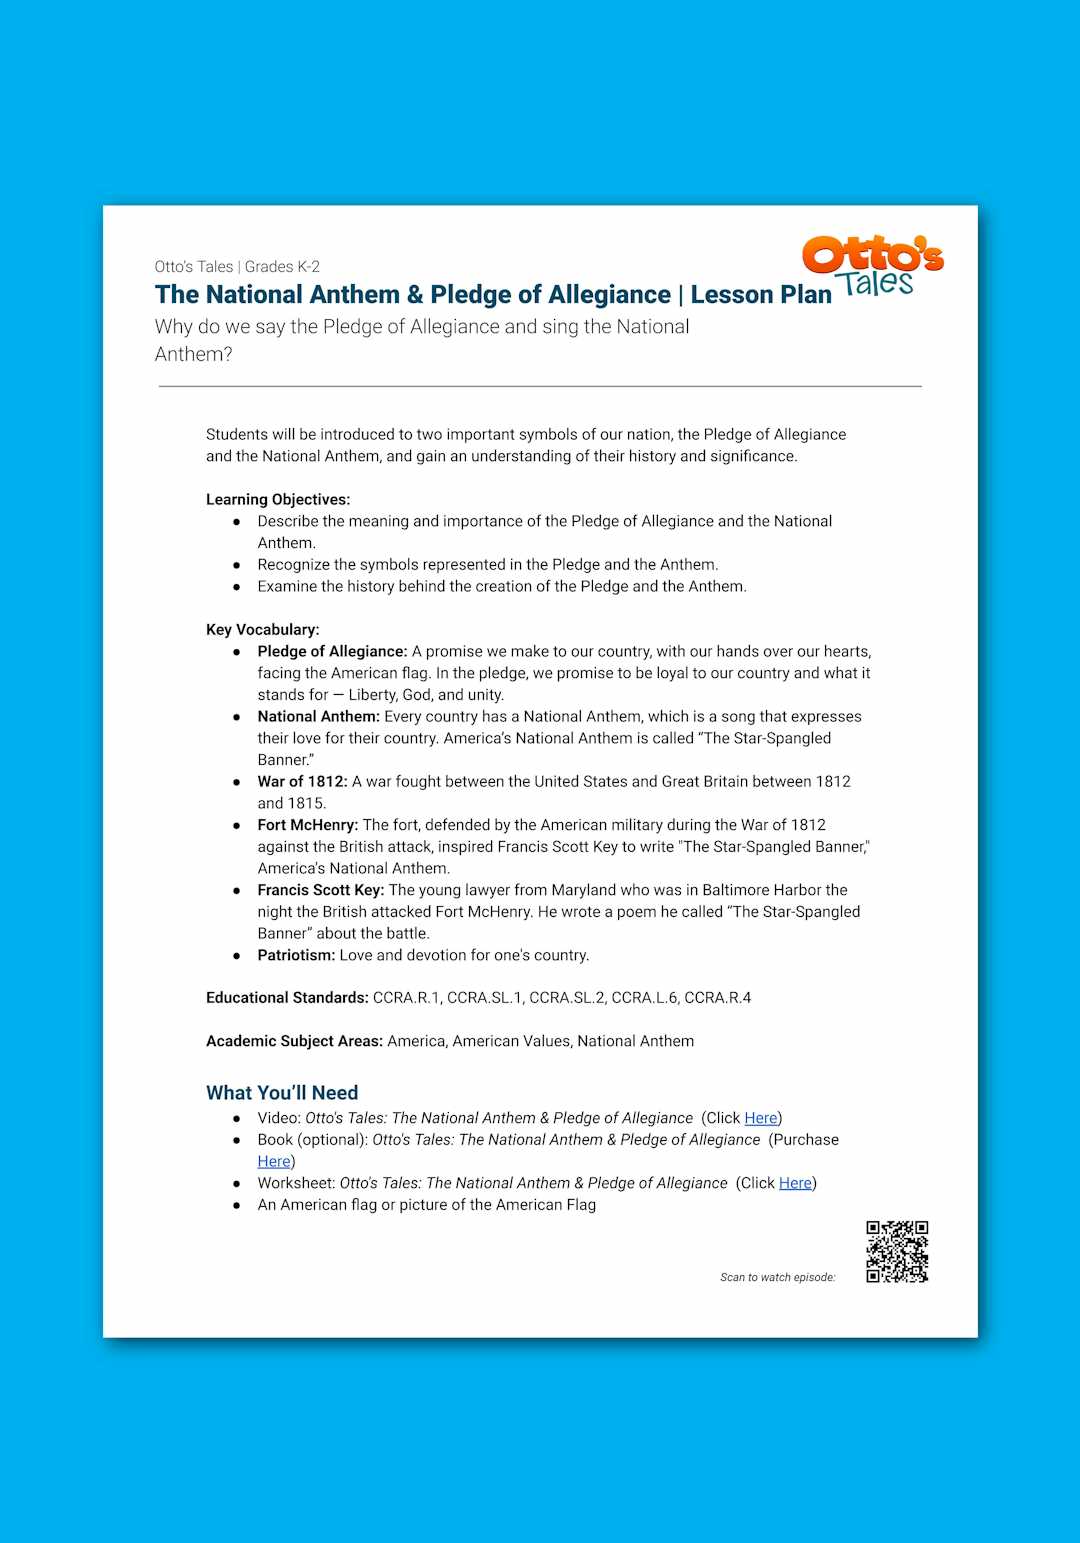 "Otto's Tales: The National Anthem & Pledge of Allegiance" Lesson Plan